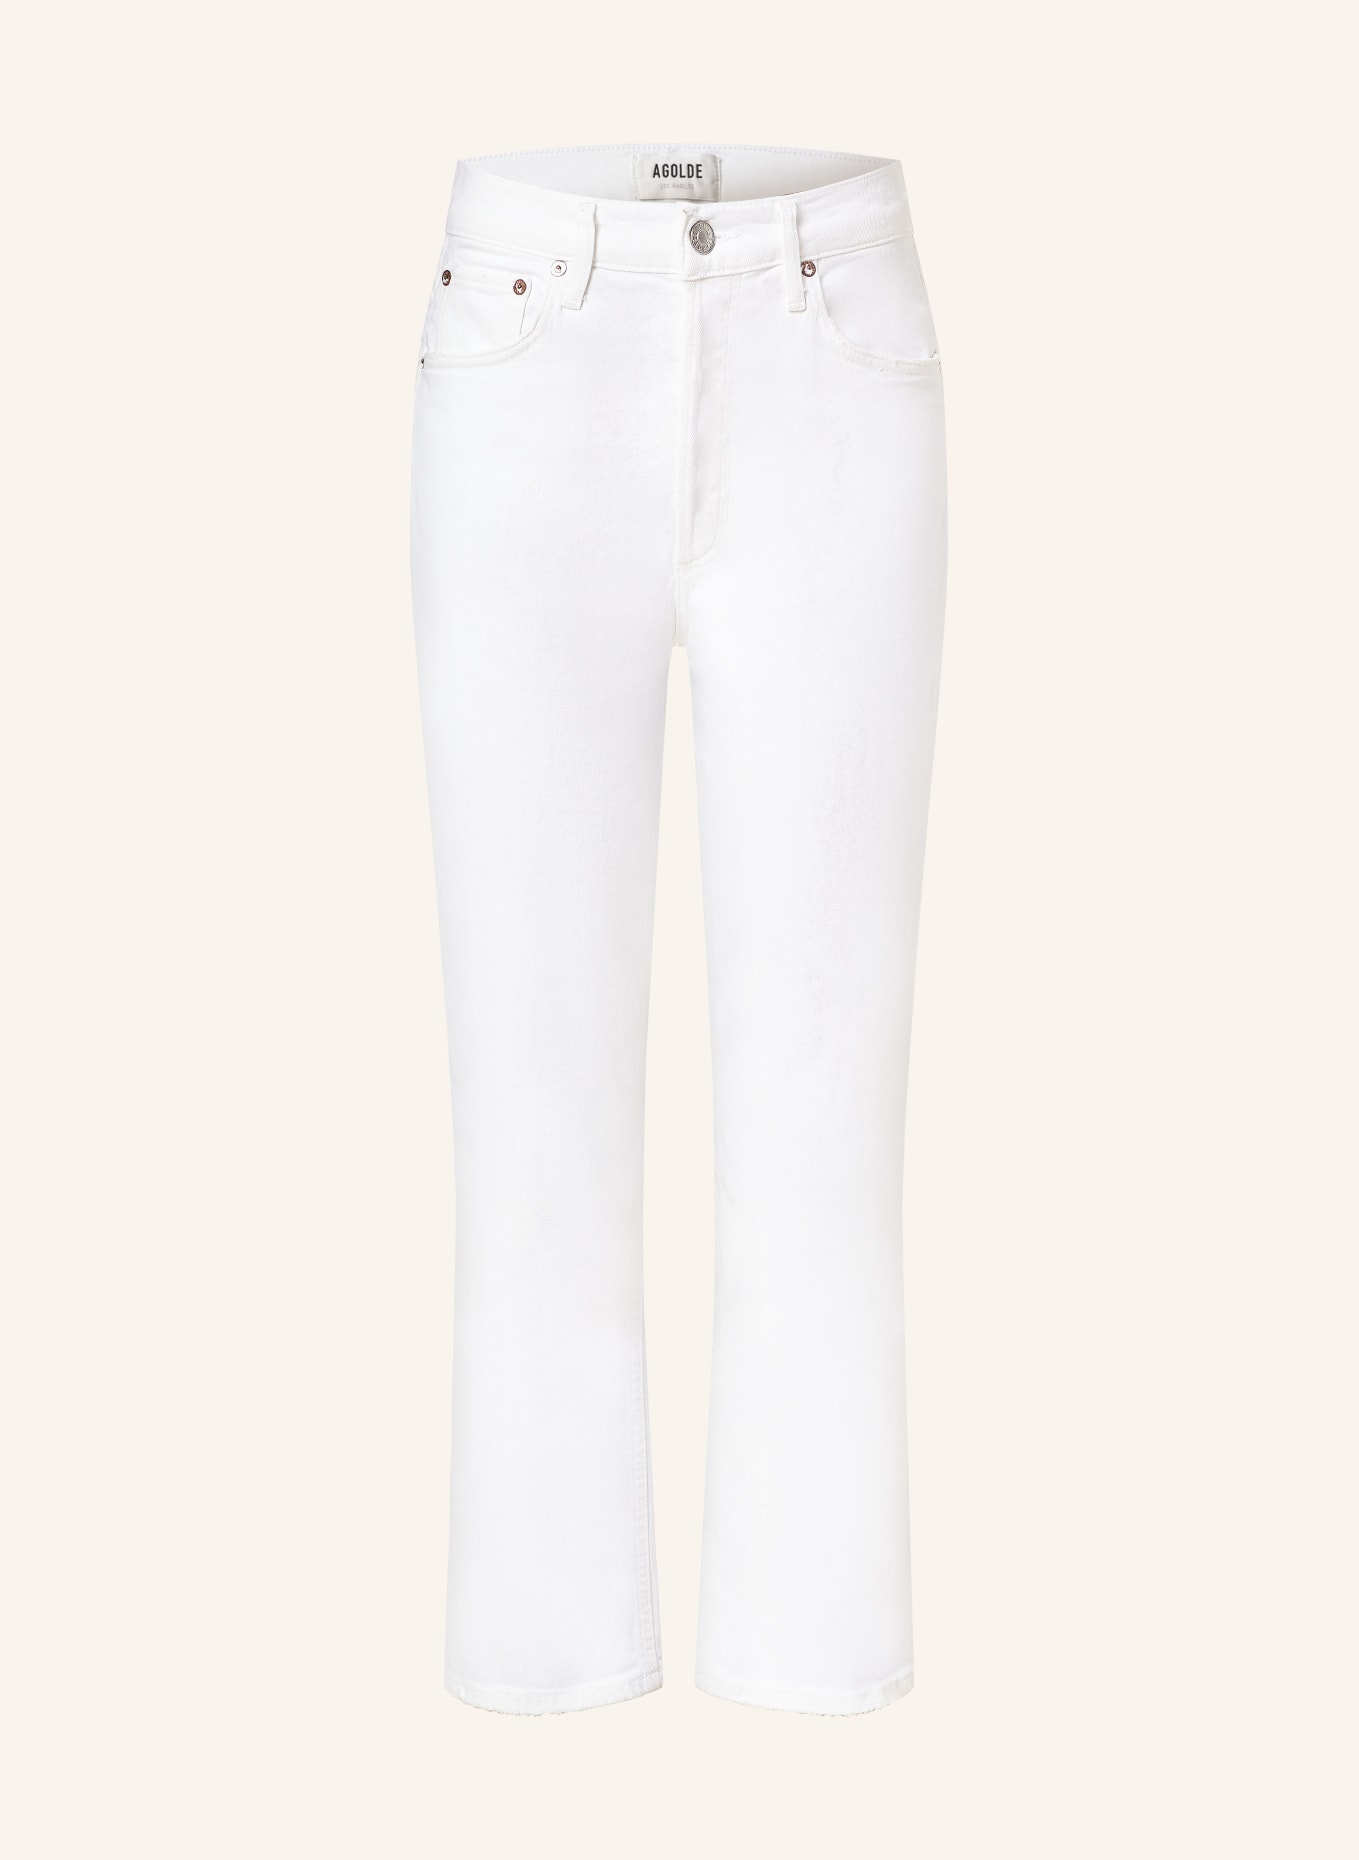 AGOLDE 7/8-Jeans RILEY, Farbe: WEISS (Bild 1)